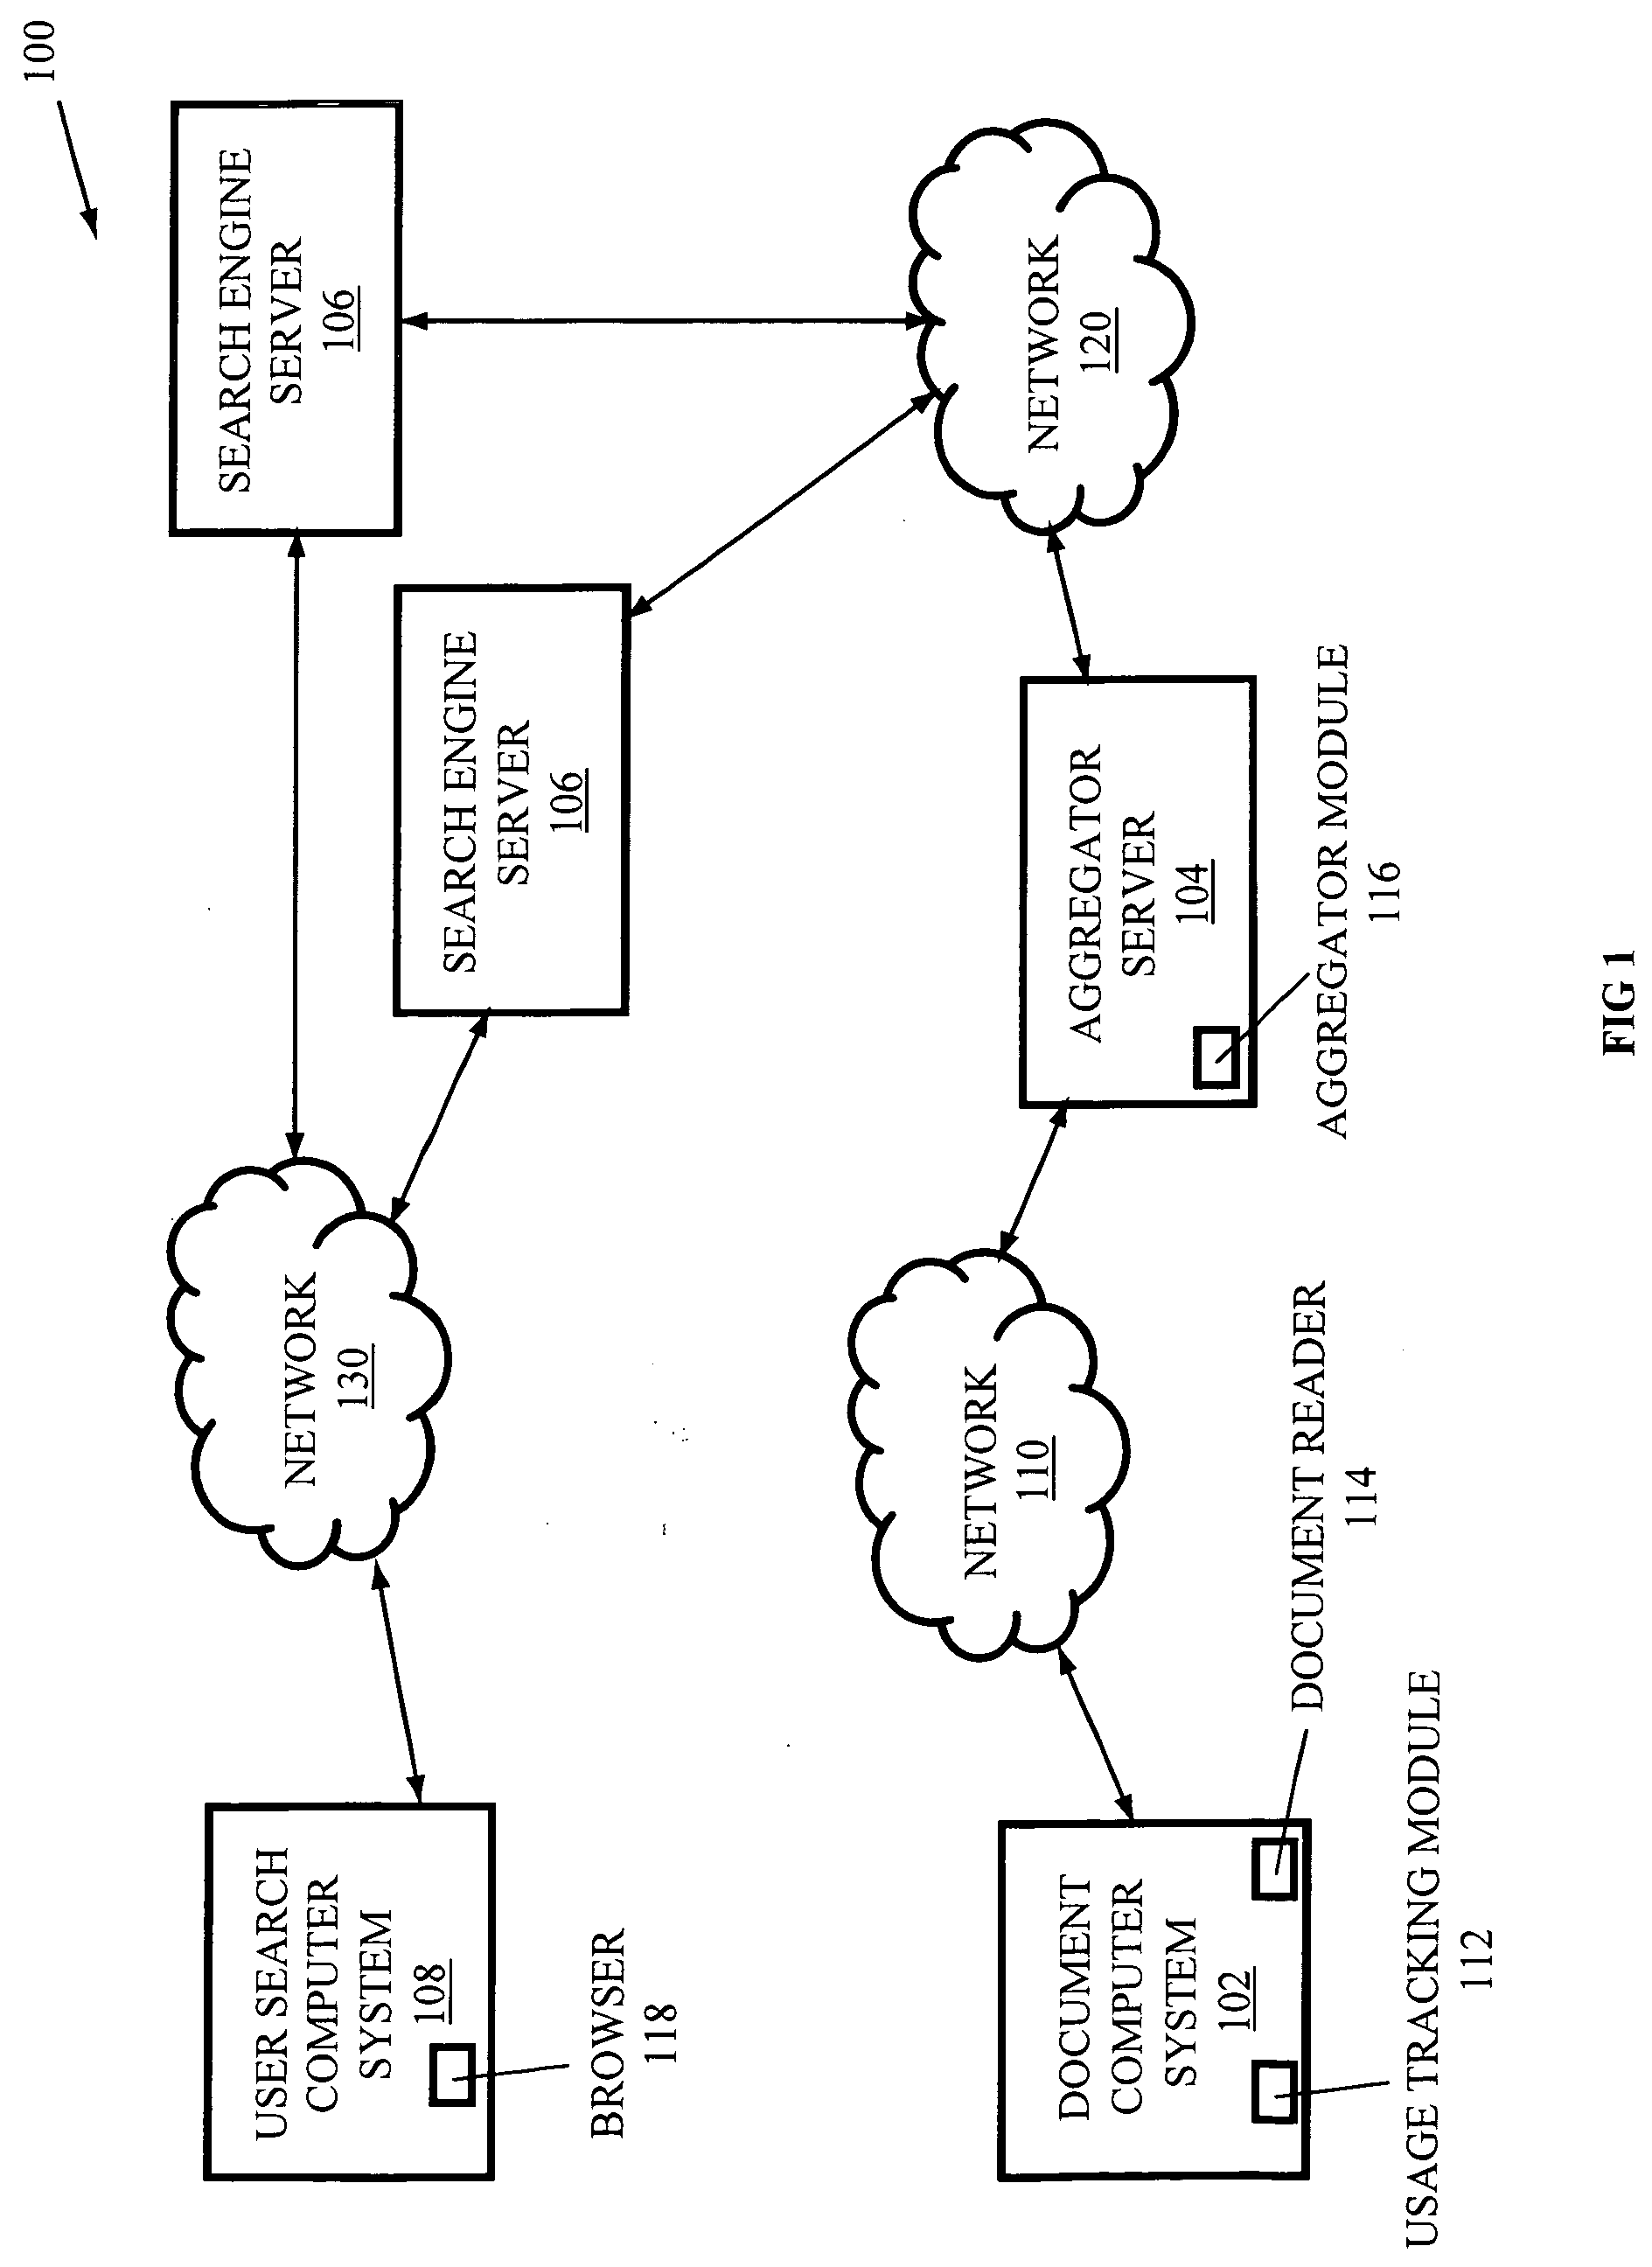 Systems, methods, and media for utilizing electronic document usage information with search engines